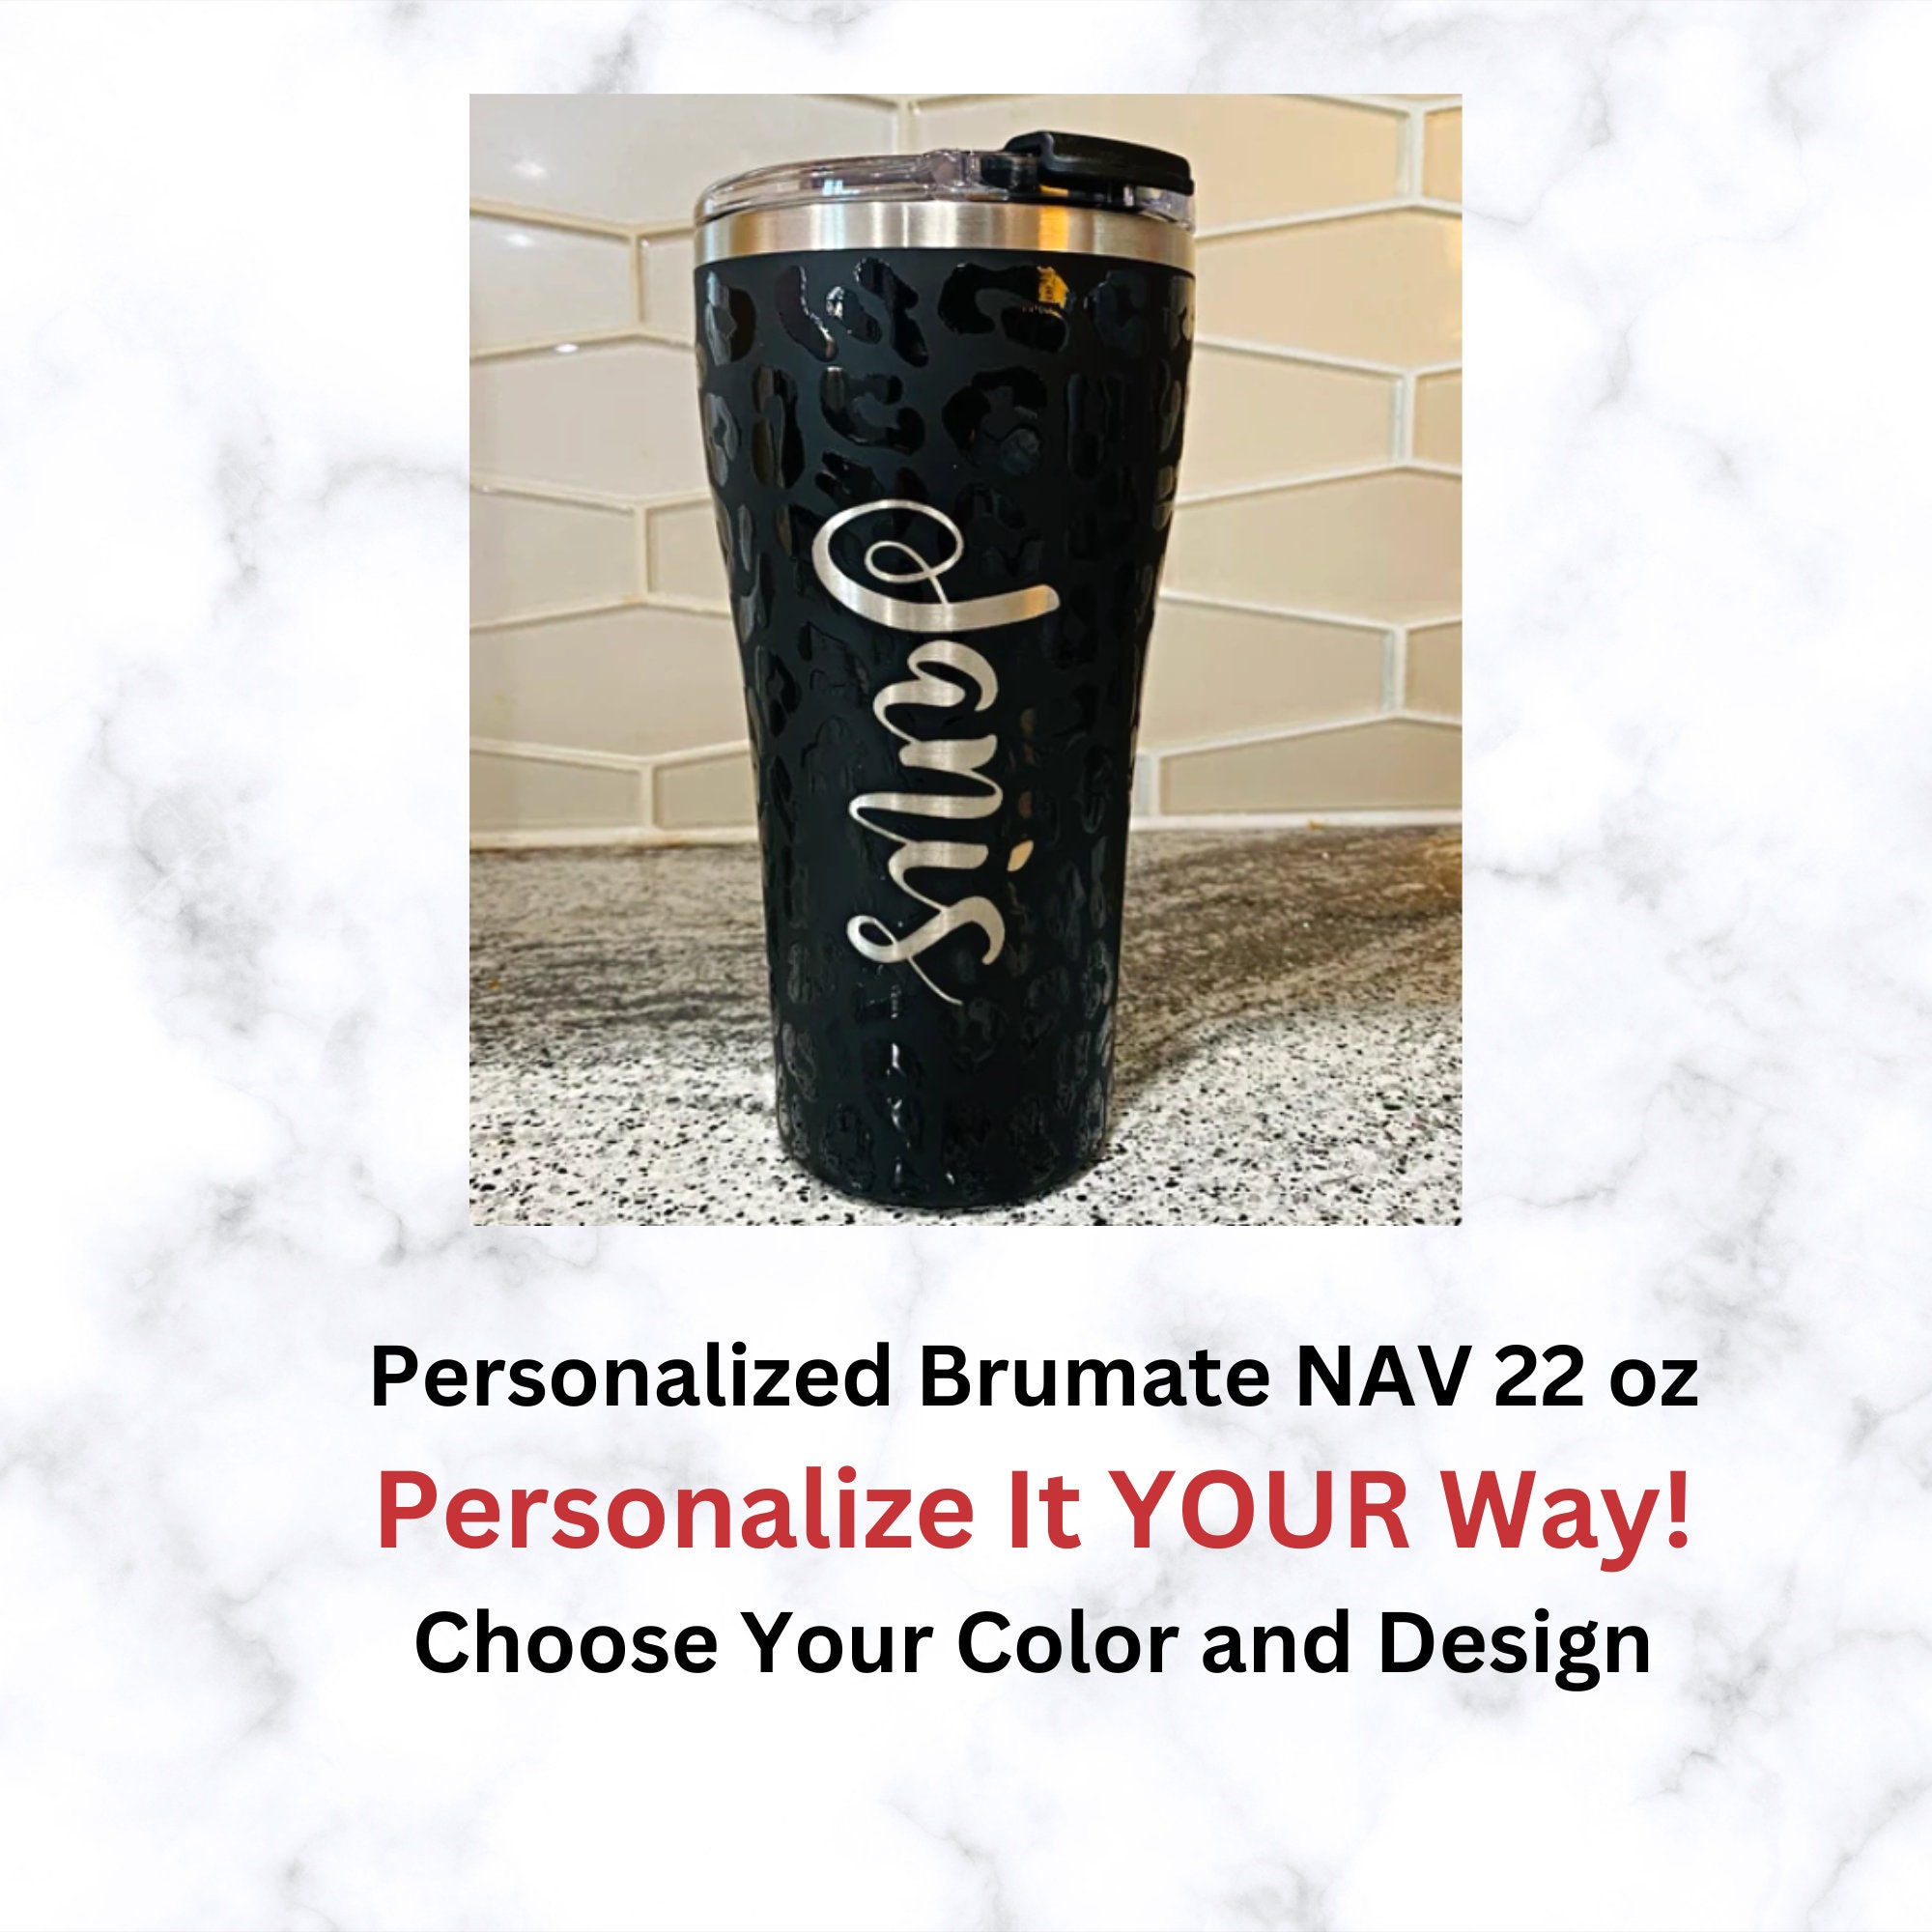 FREE Name Engraving Personalized Brumate Toddy 22 Oz Choose Your